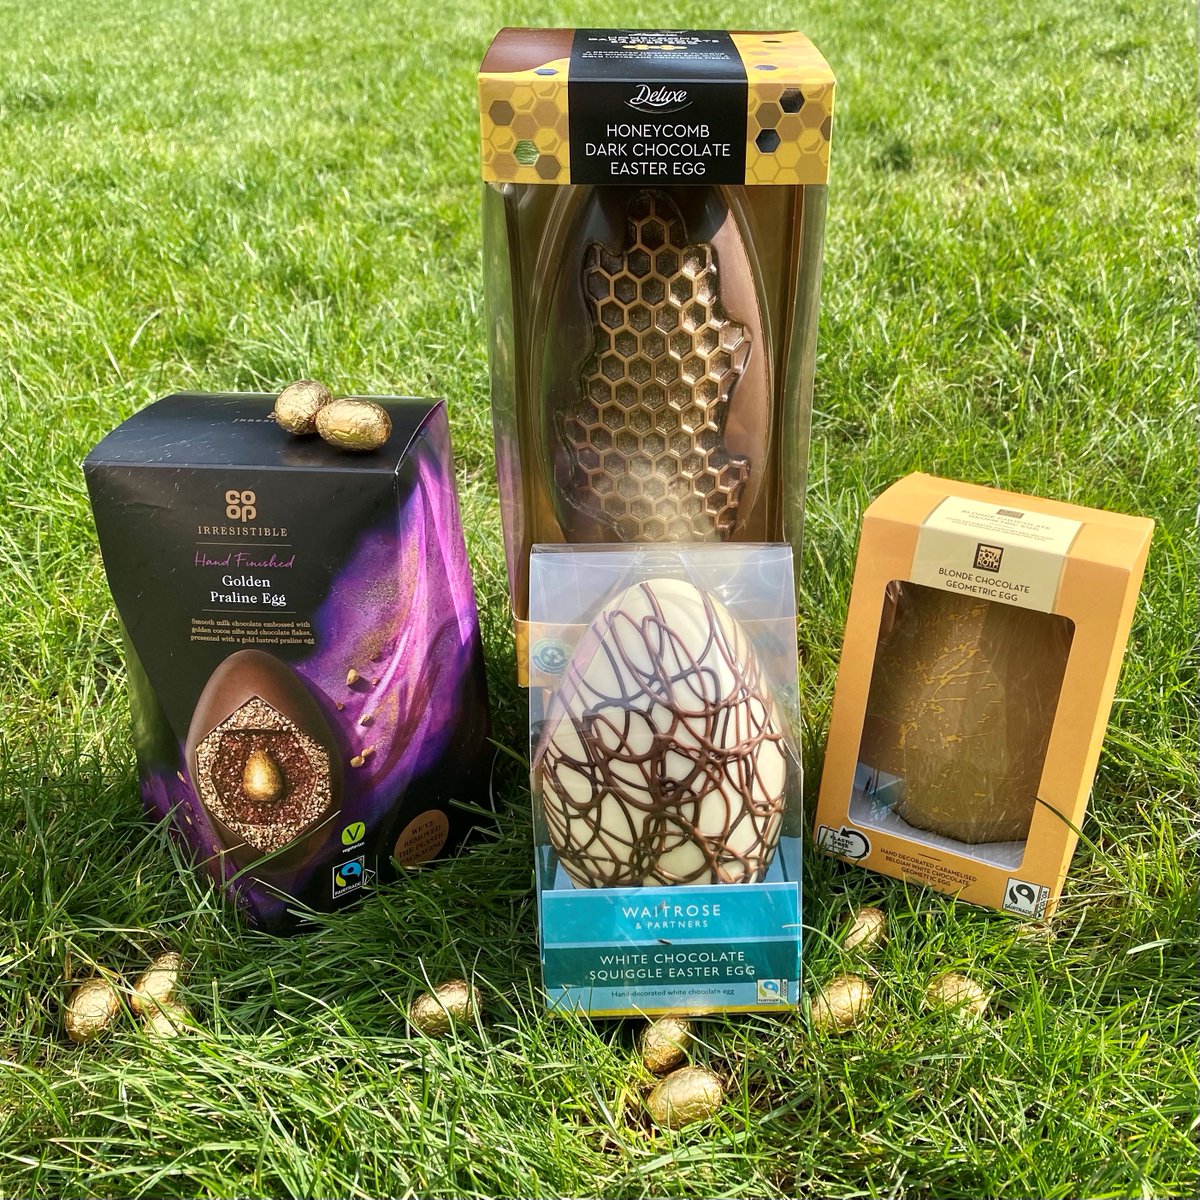 Competition! Put the eggstradordinary into Easter this year by choosing Fairtrade chocolate. 🍫🐣 #FairtradeFriday

Like & RT to #win this delicious selection from our retailer partners, @aldiuk, @coopuk, @lidlgb and @waitrose.

UK only, 16+. T&Cs: bit.ly/FairtradeFriday